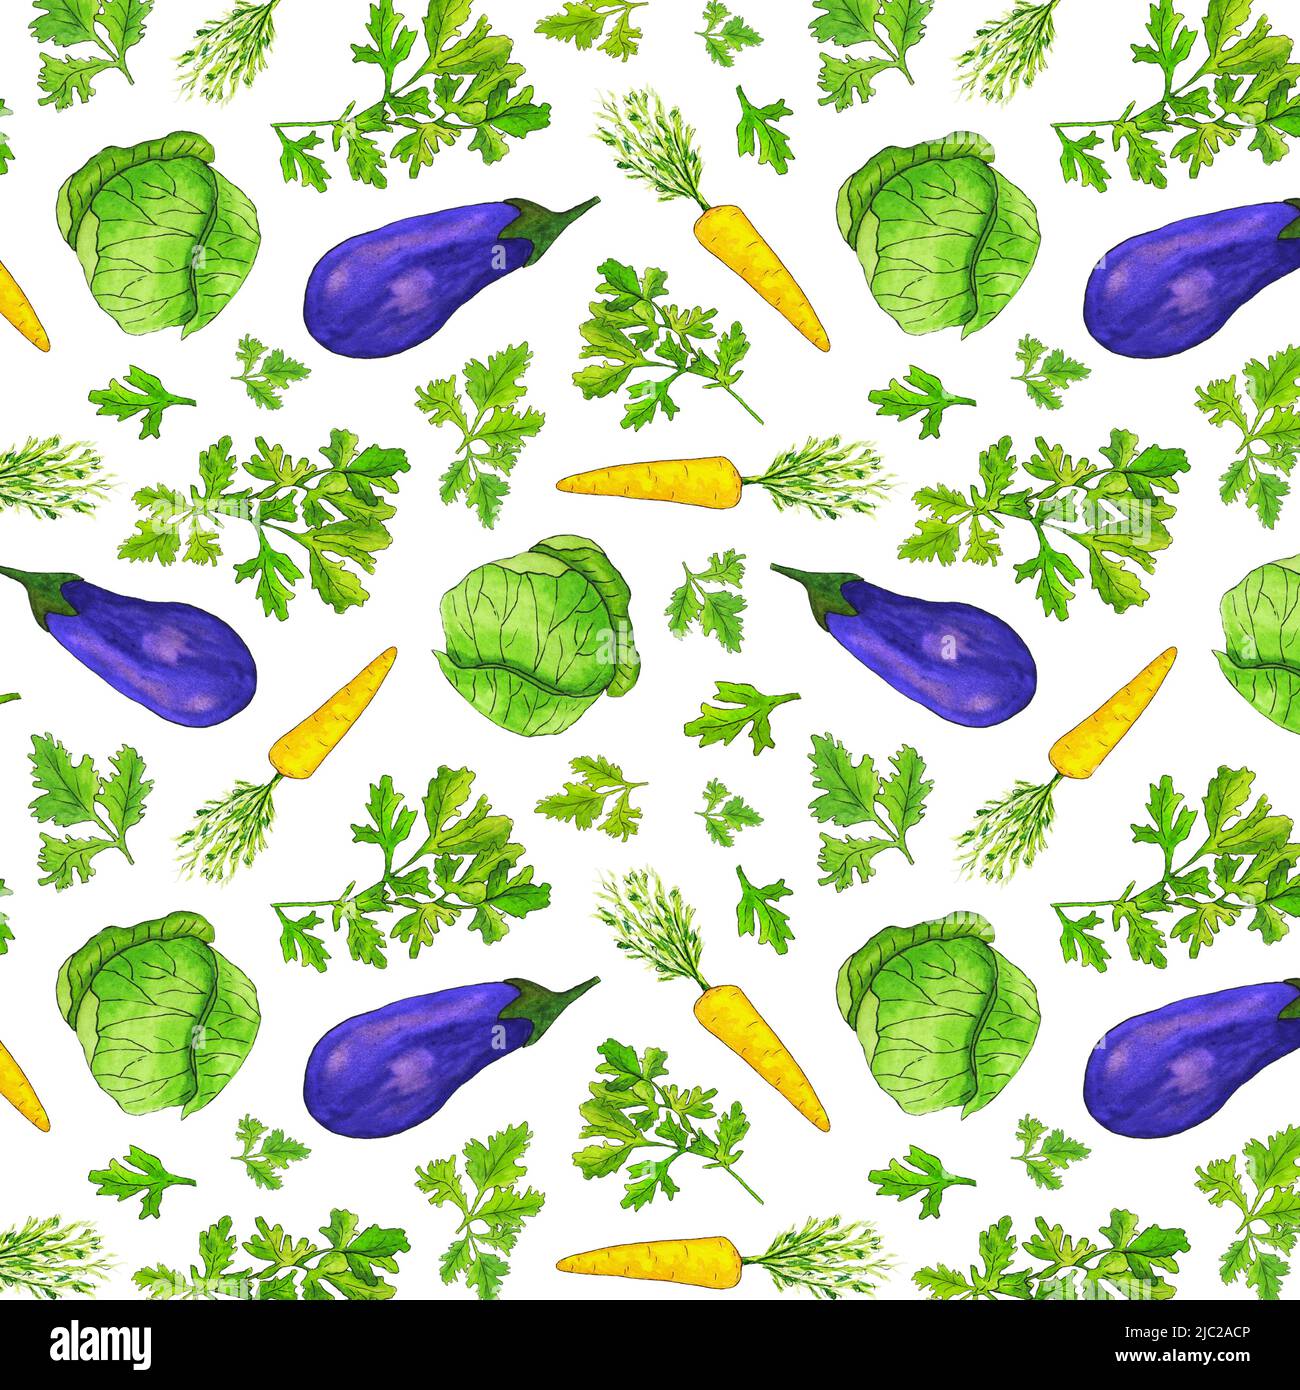 Watercolor vegetable seamless pattern on white background. Vitamin Vegetable Pattern with Green Cabbage, Eggplant , Carrot and Parsley. Summer Salad. Stock Photo